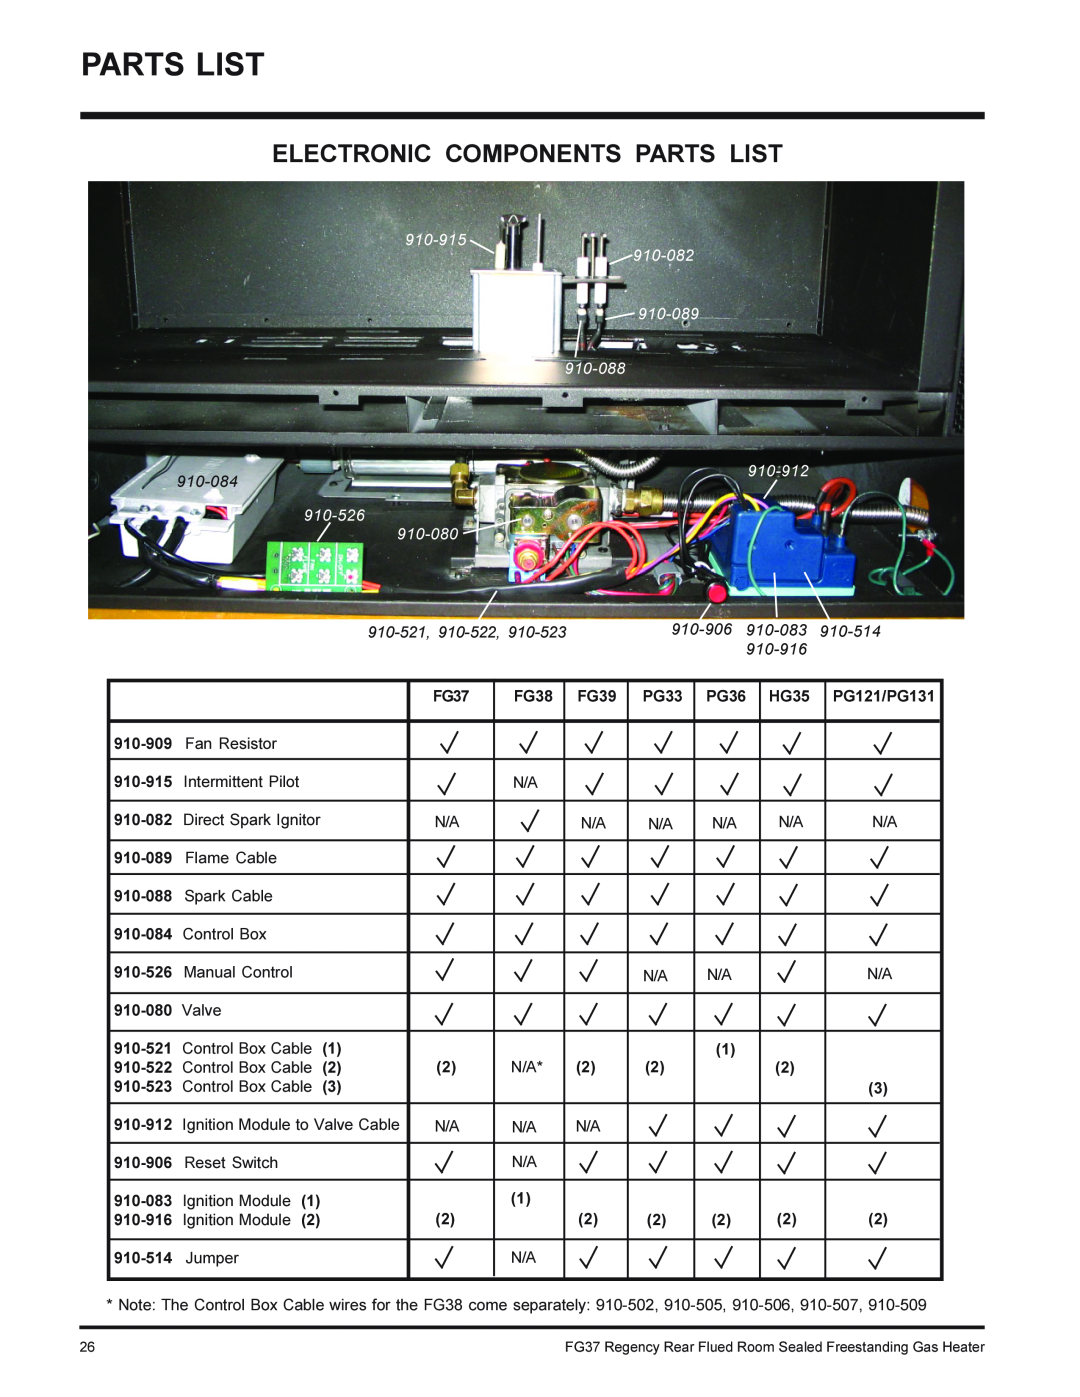 Regency FG37-LPG, FG37-NG installation manual Electronic Components Parts List, 910-915, 910-084, 910-912, 910-526, 910-080 